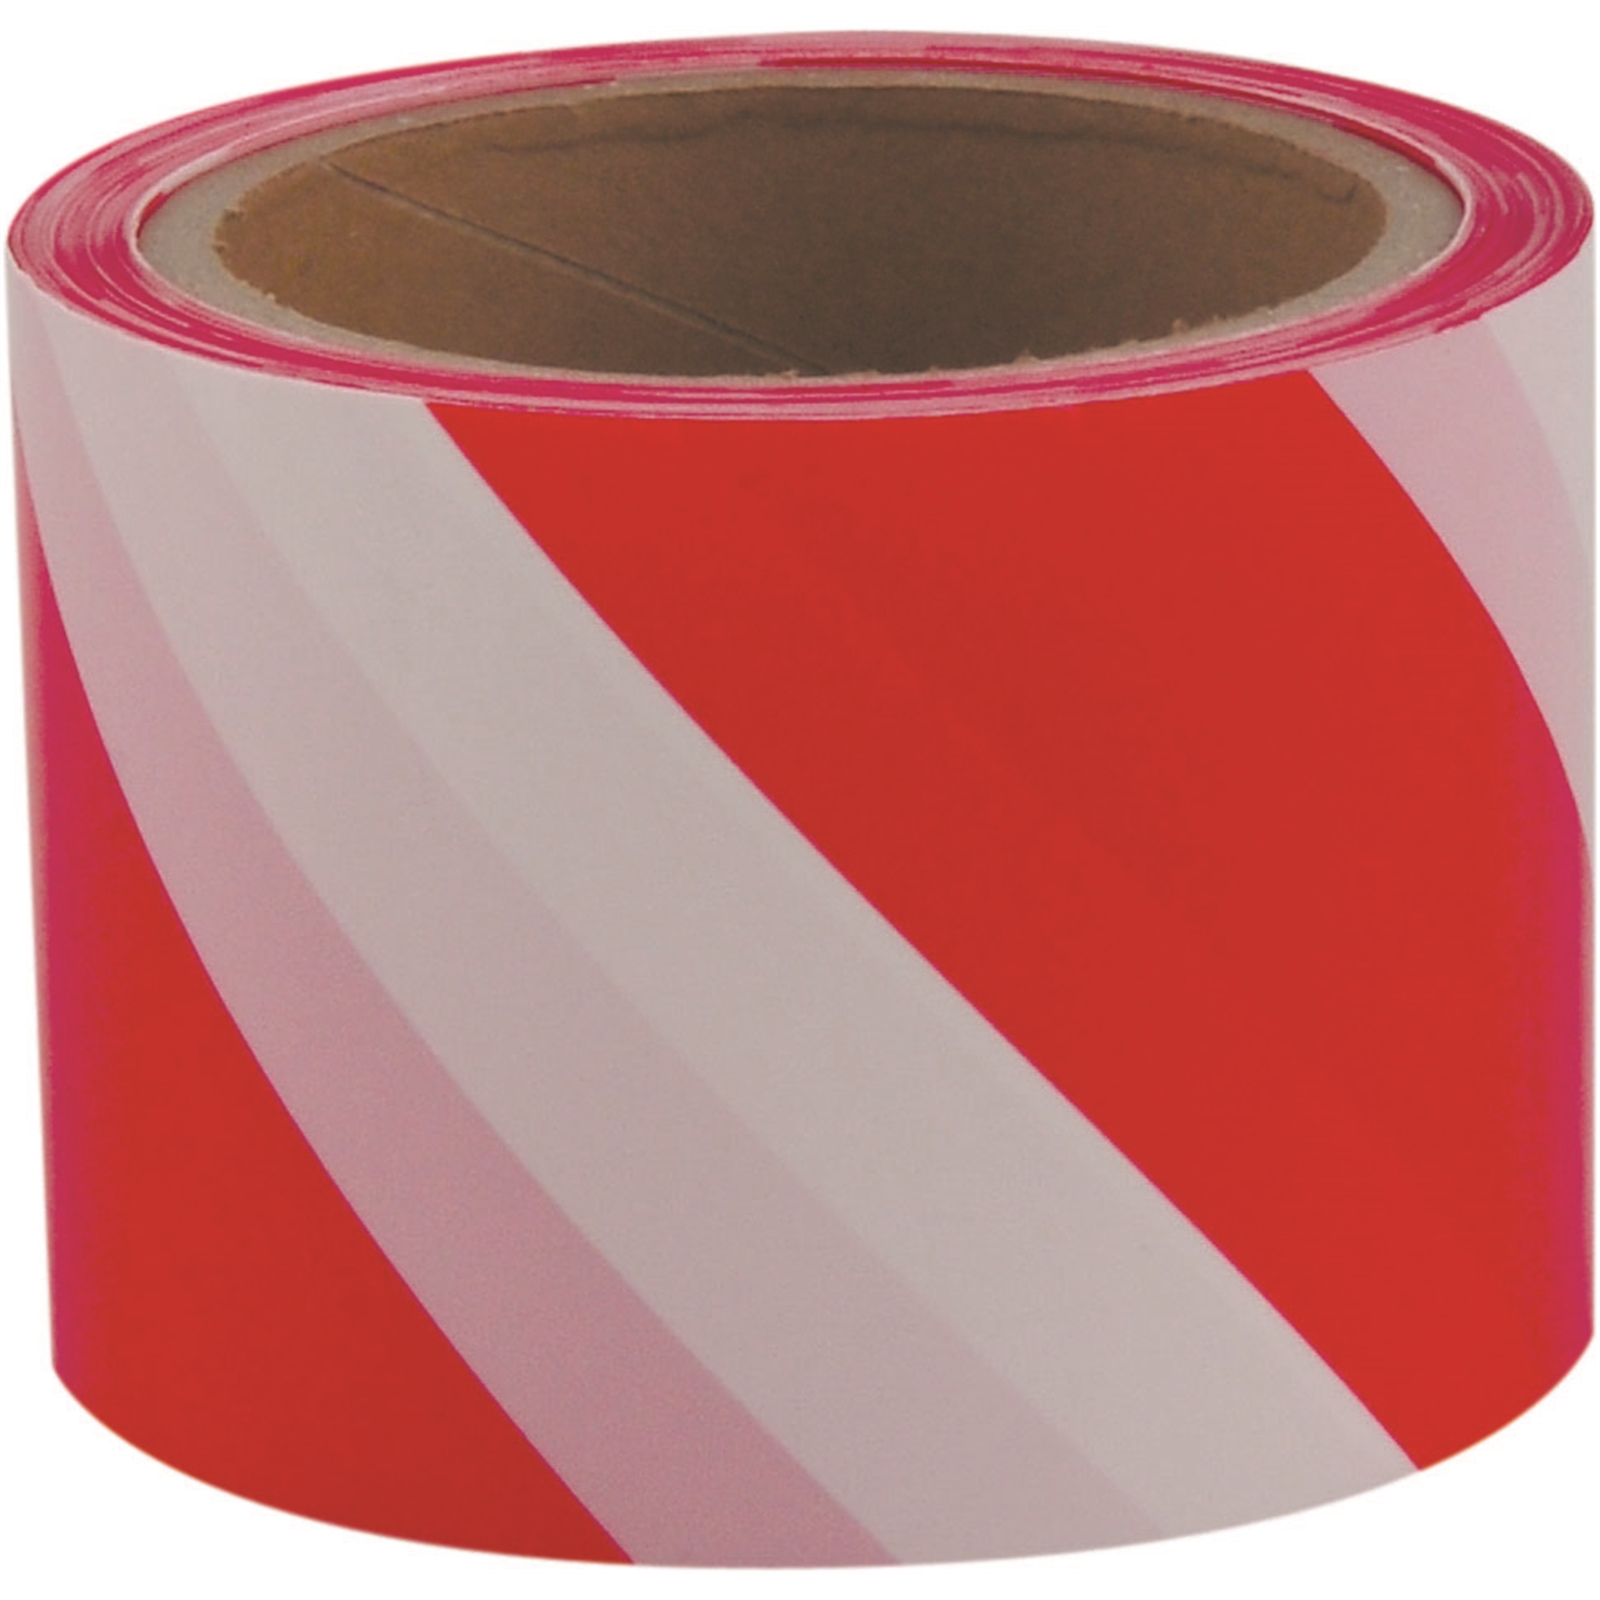 Whites On-Site 75mm x 100m Red / White Safety Tape